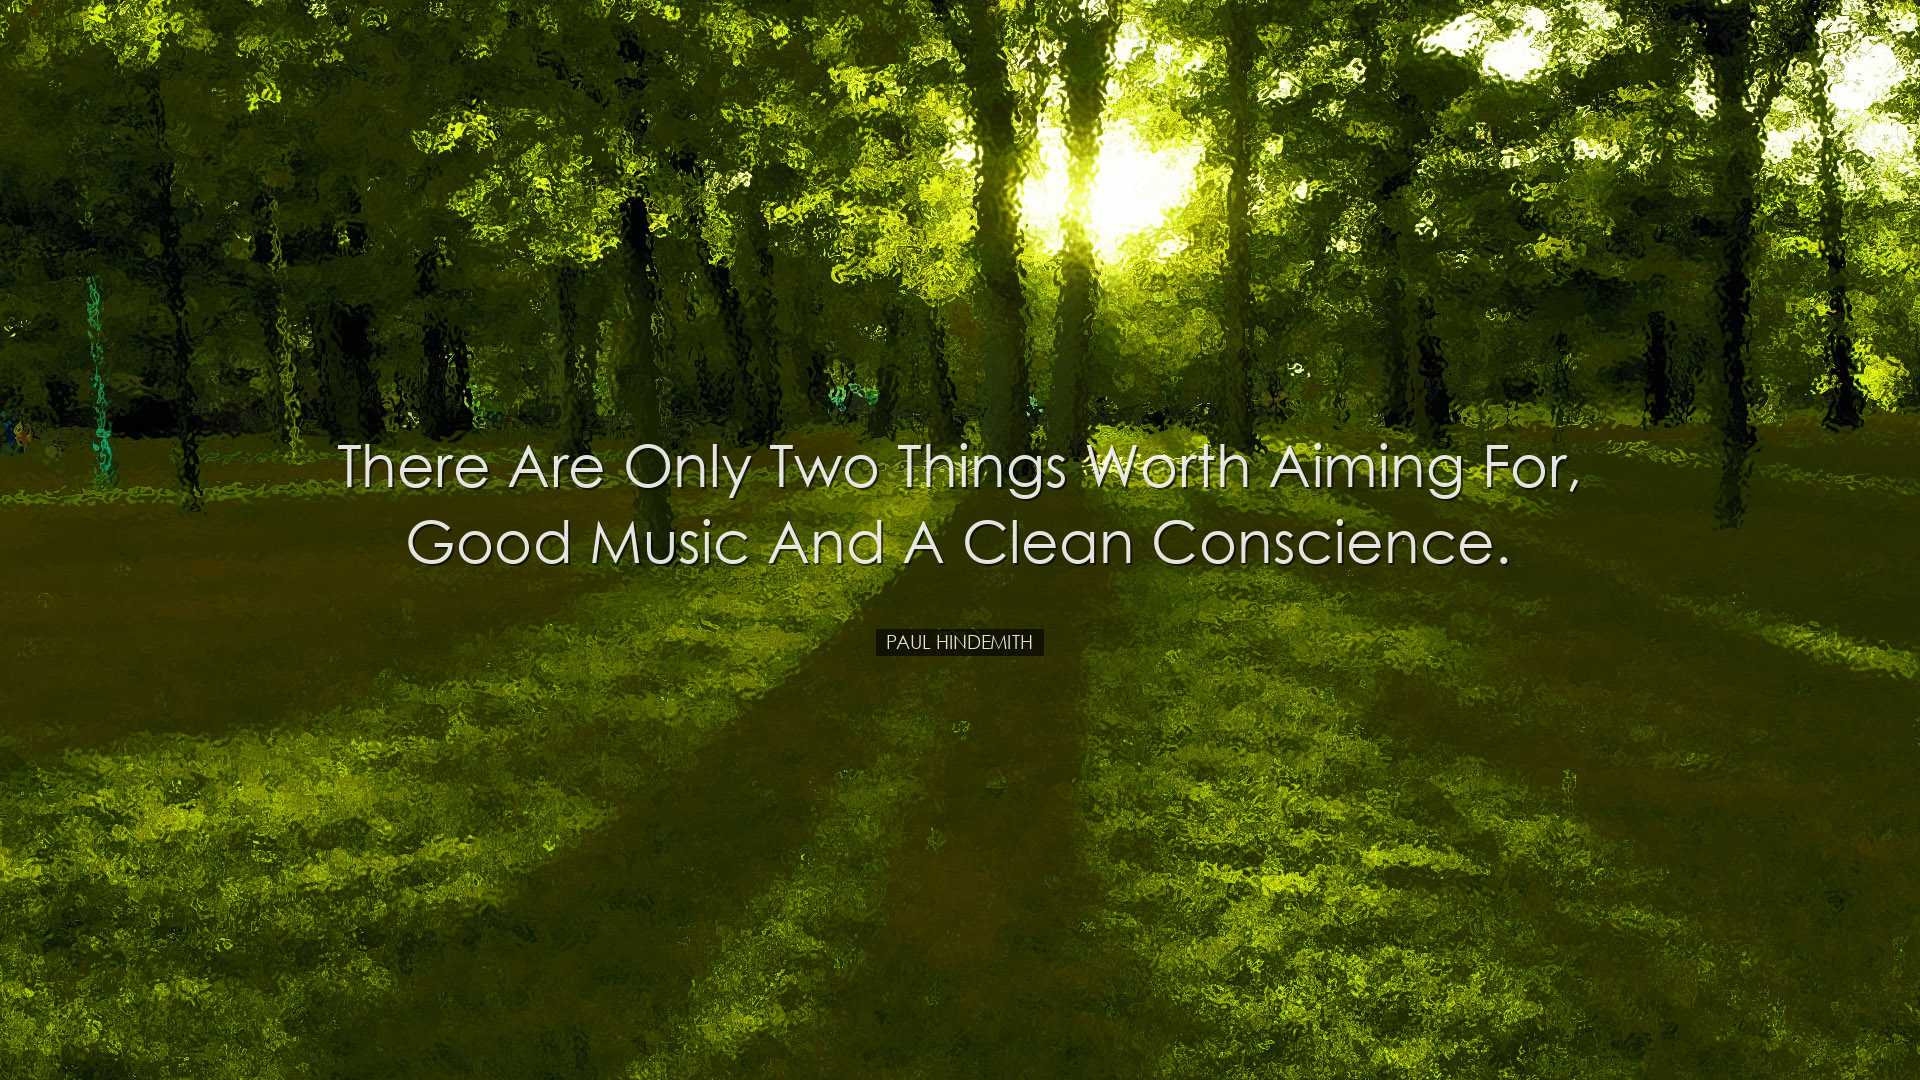 There are only two things worth aiming for, good music and a clean